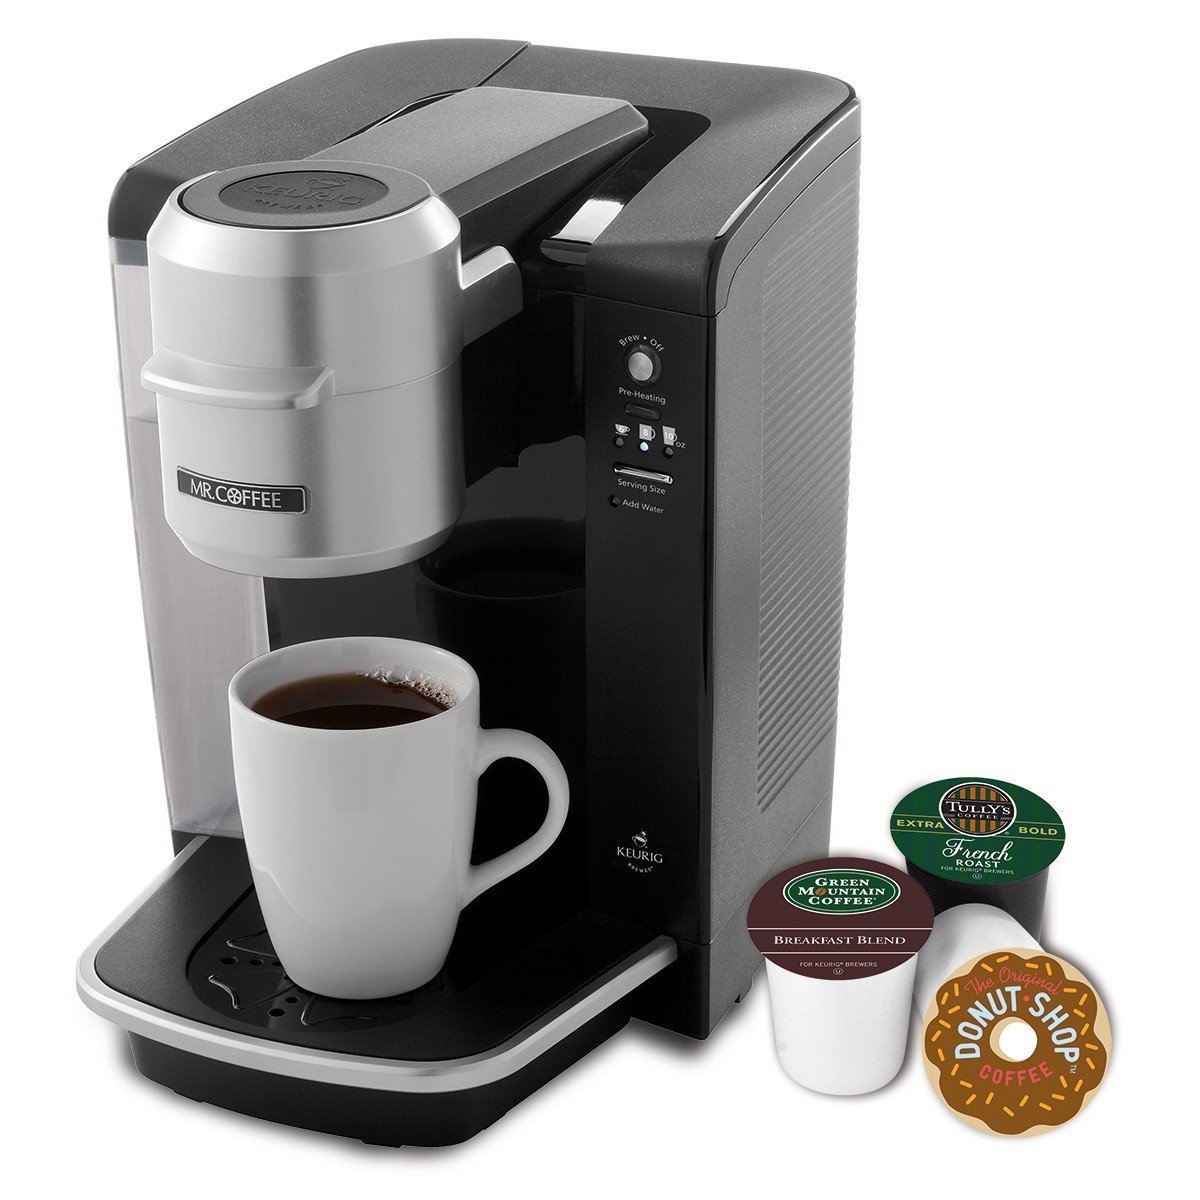 Most Affordable Single-Serve: The Hamilton Beach 49981A Coffee Maker 